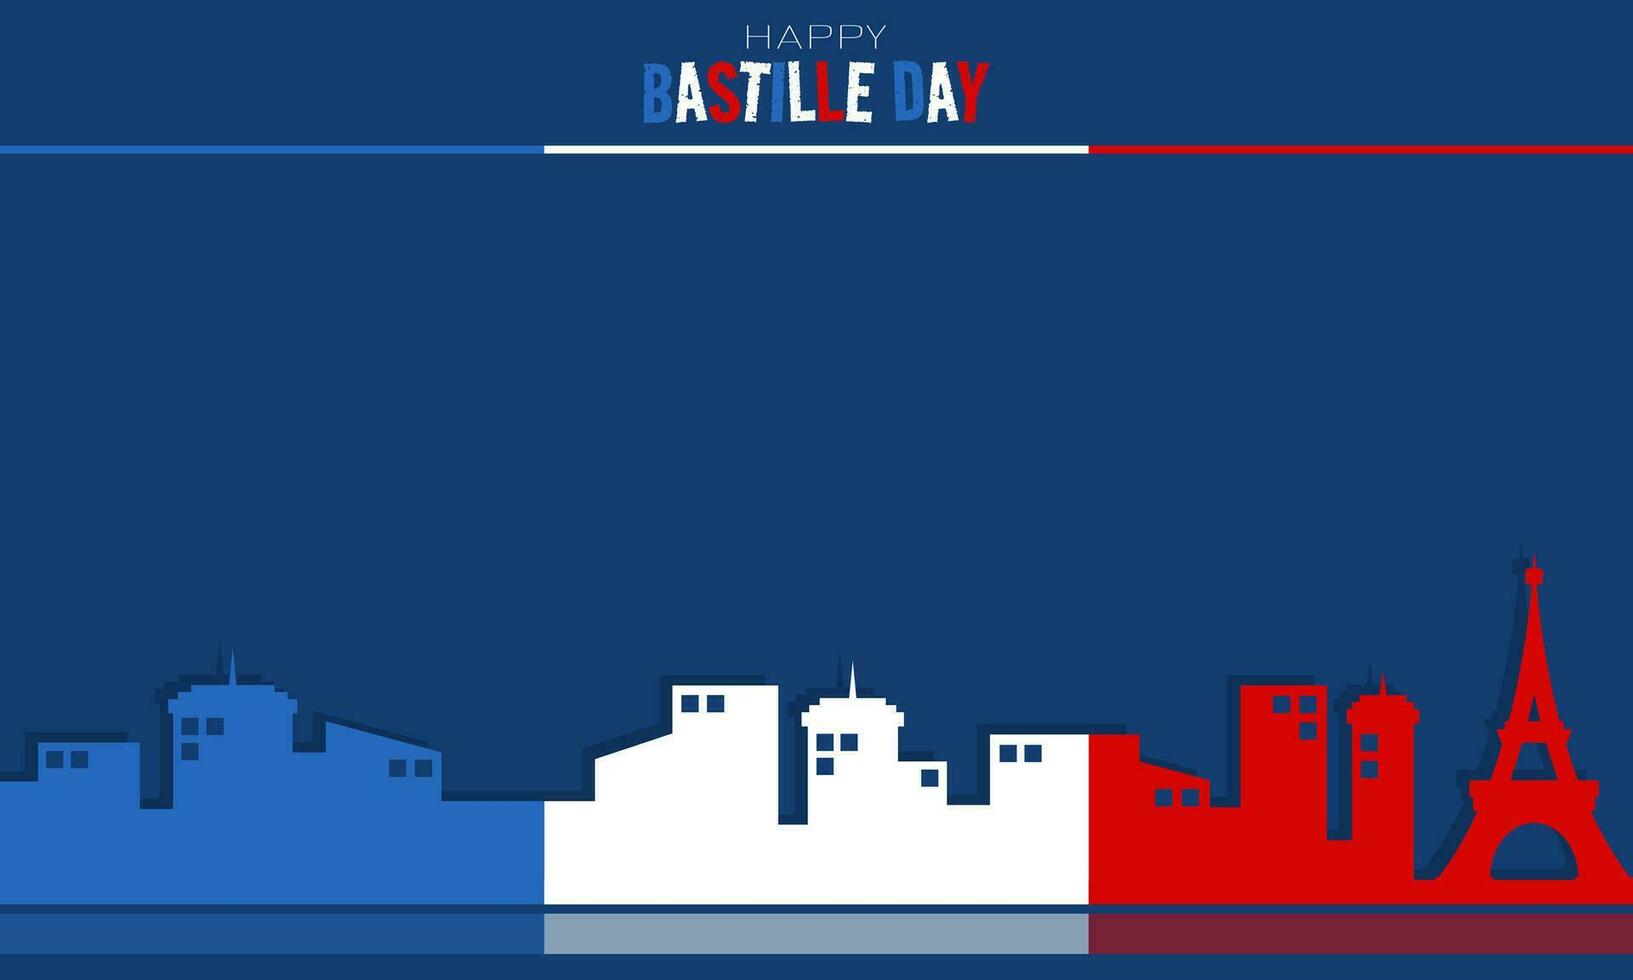 Happy Bastille Day background with colorful city and copy space area vector